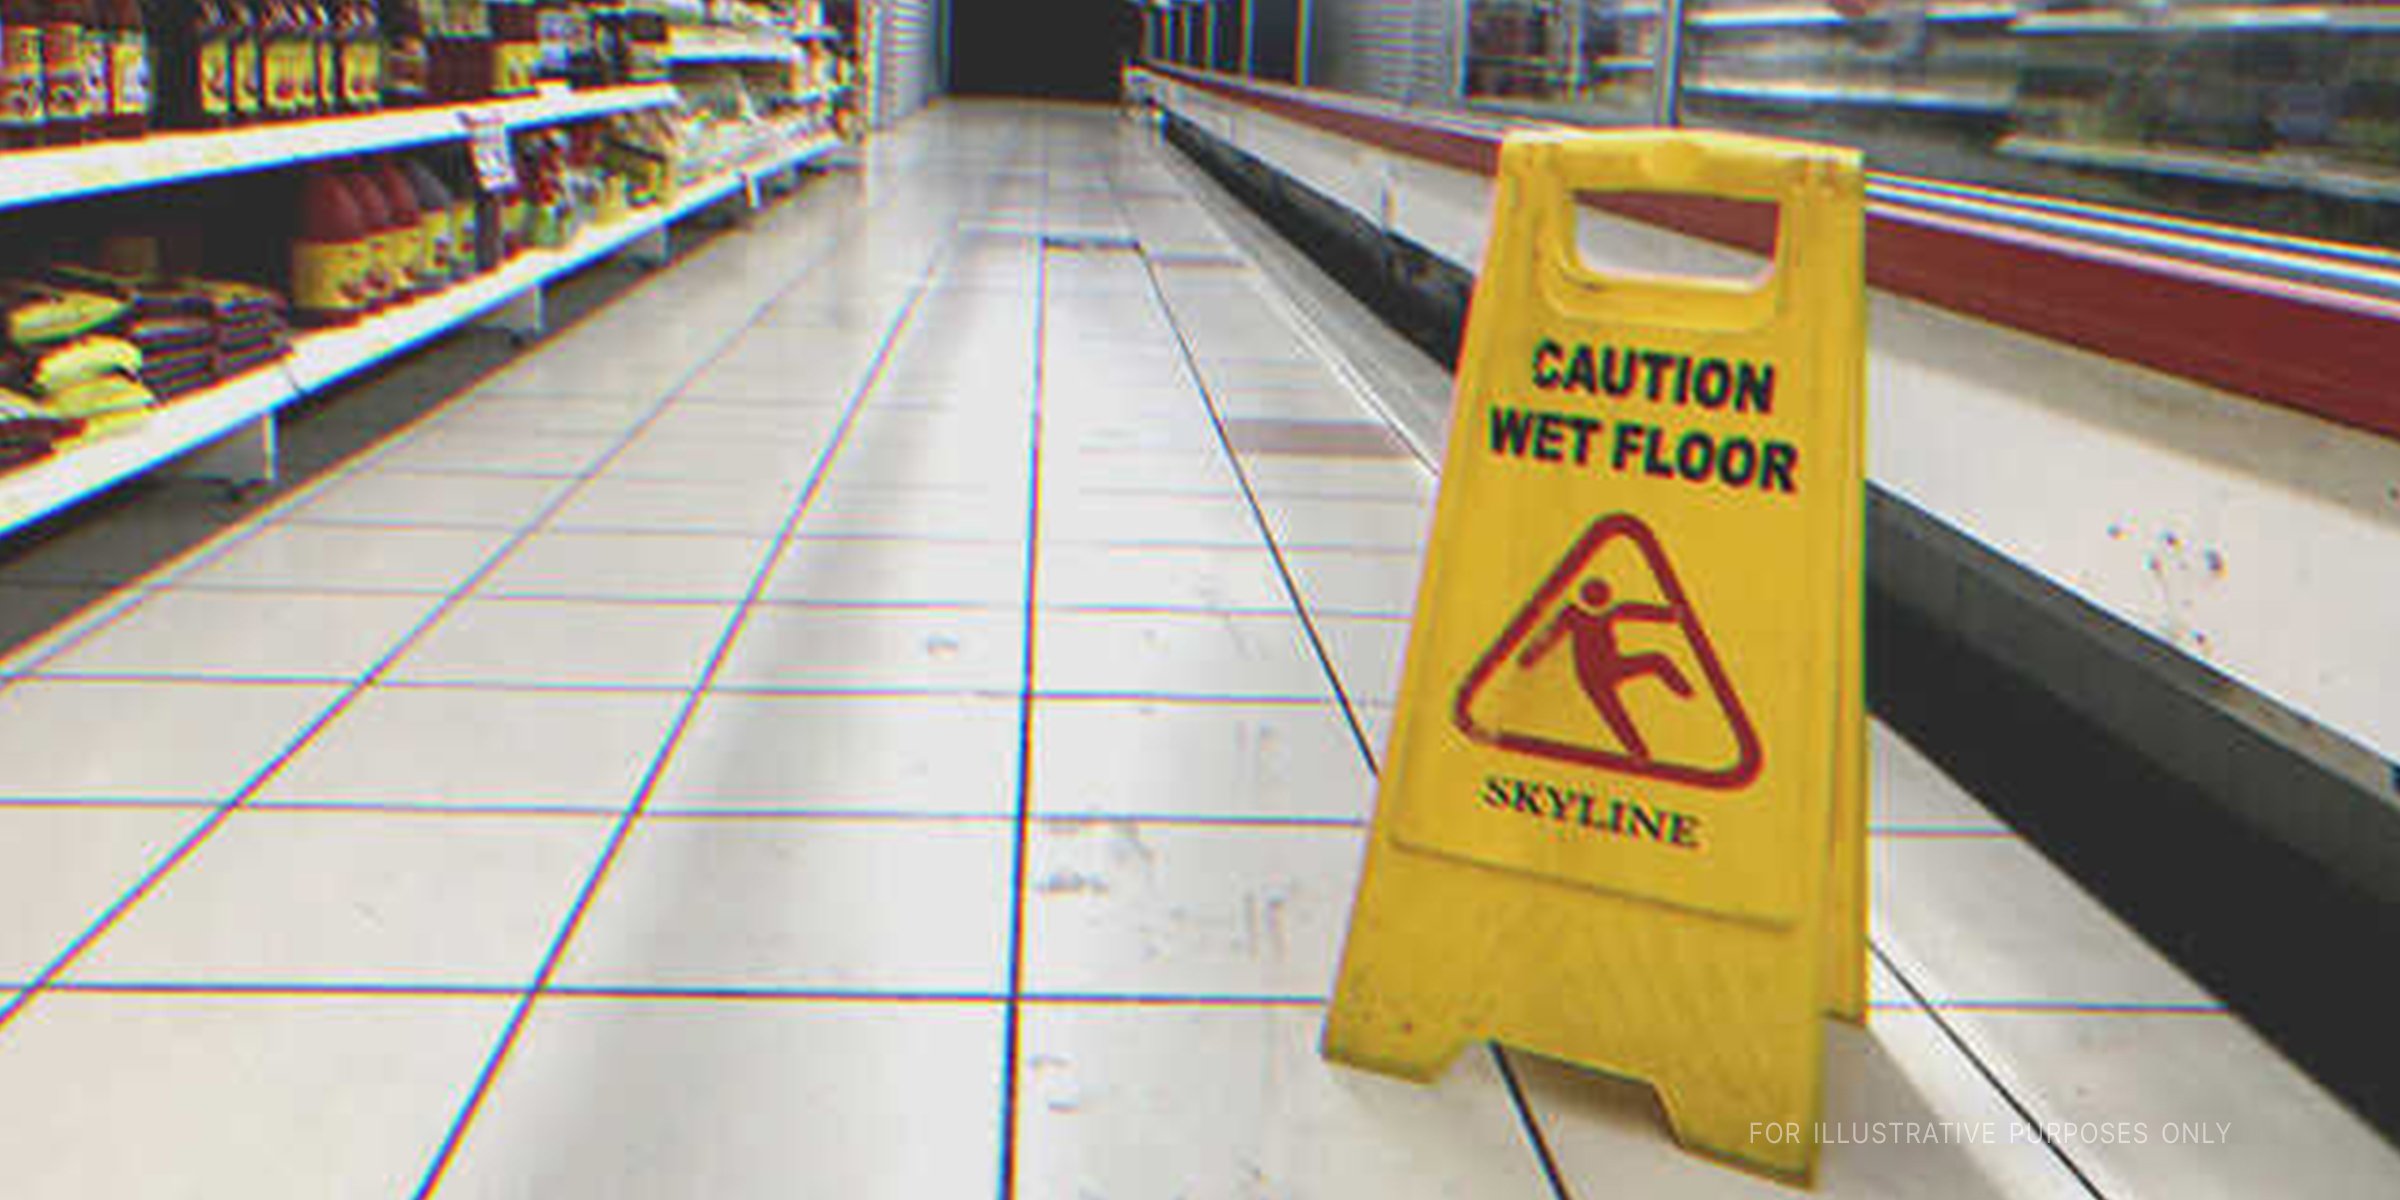 Warning sign at grocery store. | Source: Shutterstock